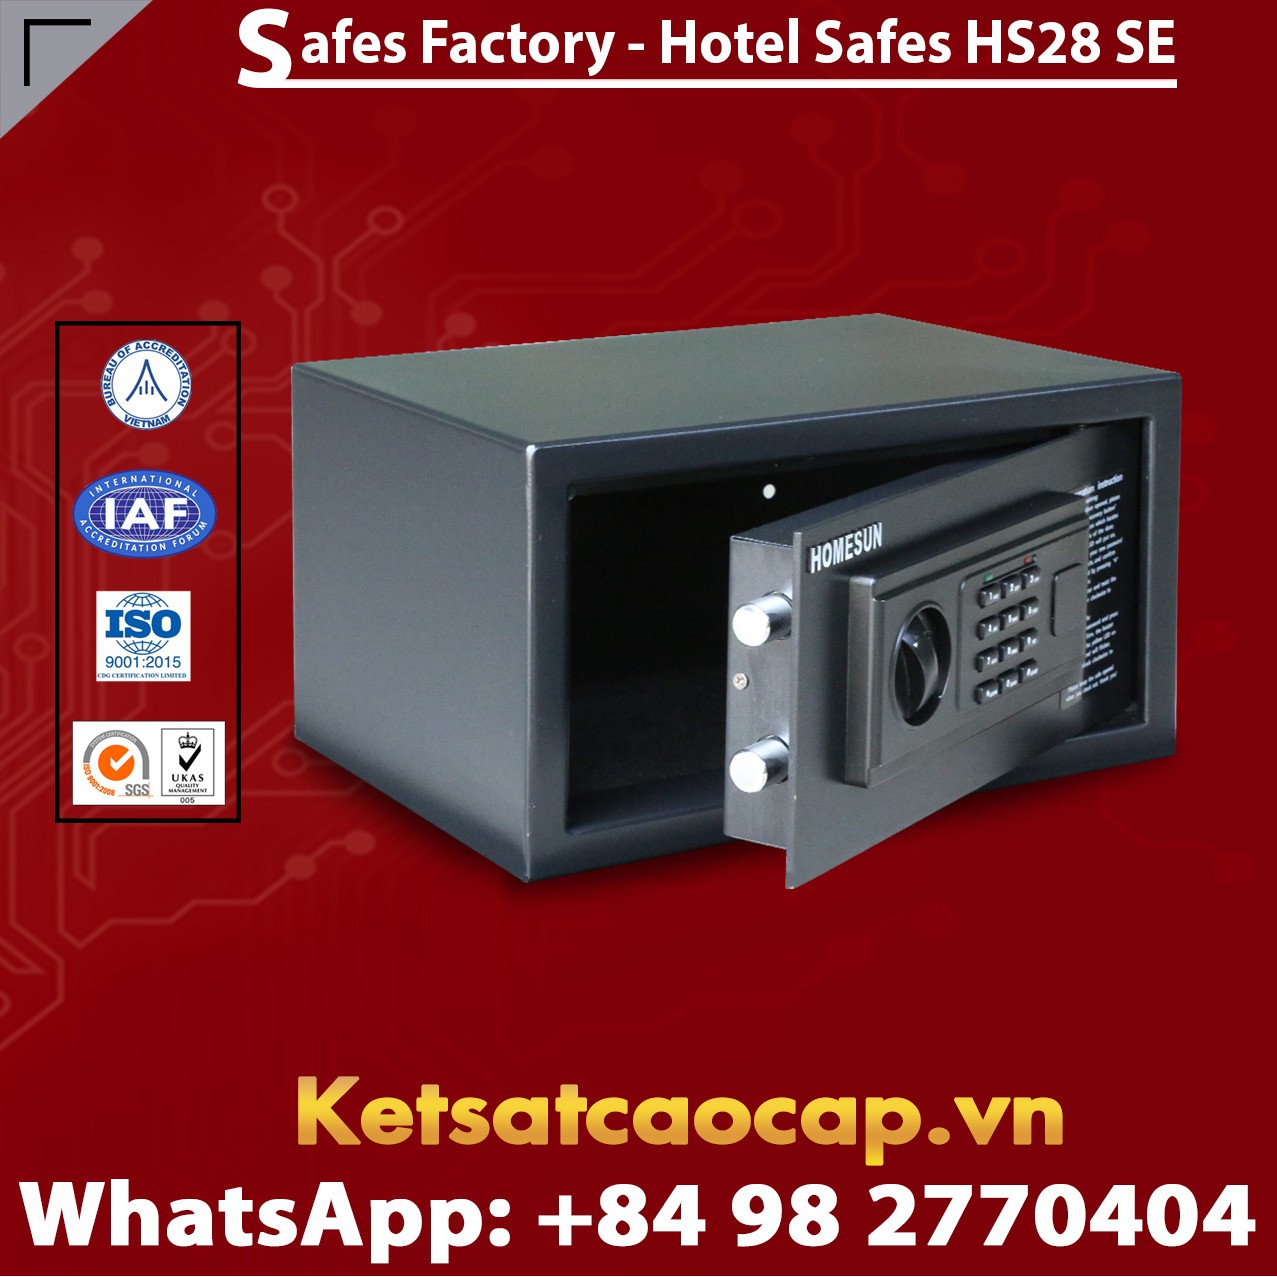 Hotel Safety Deposit Box Suppliers and Exporters HOMESUN